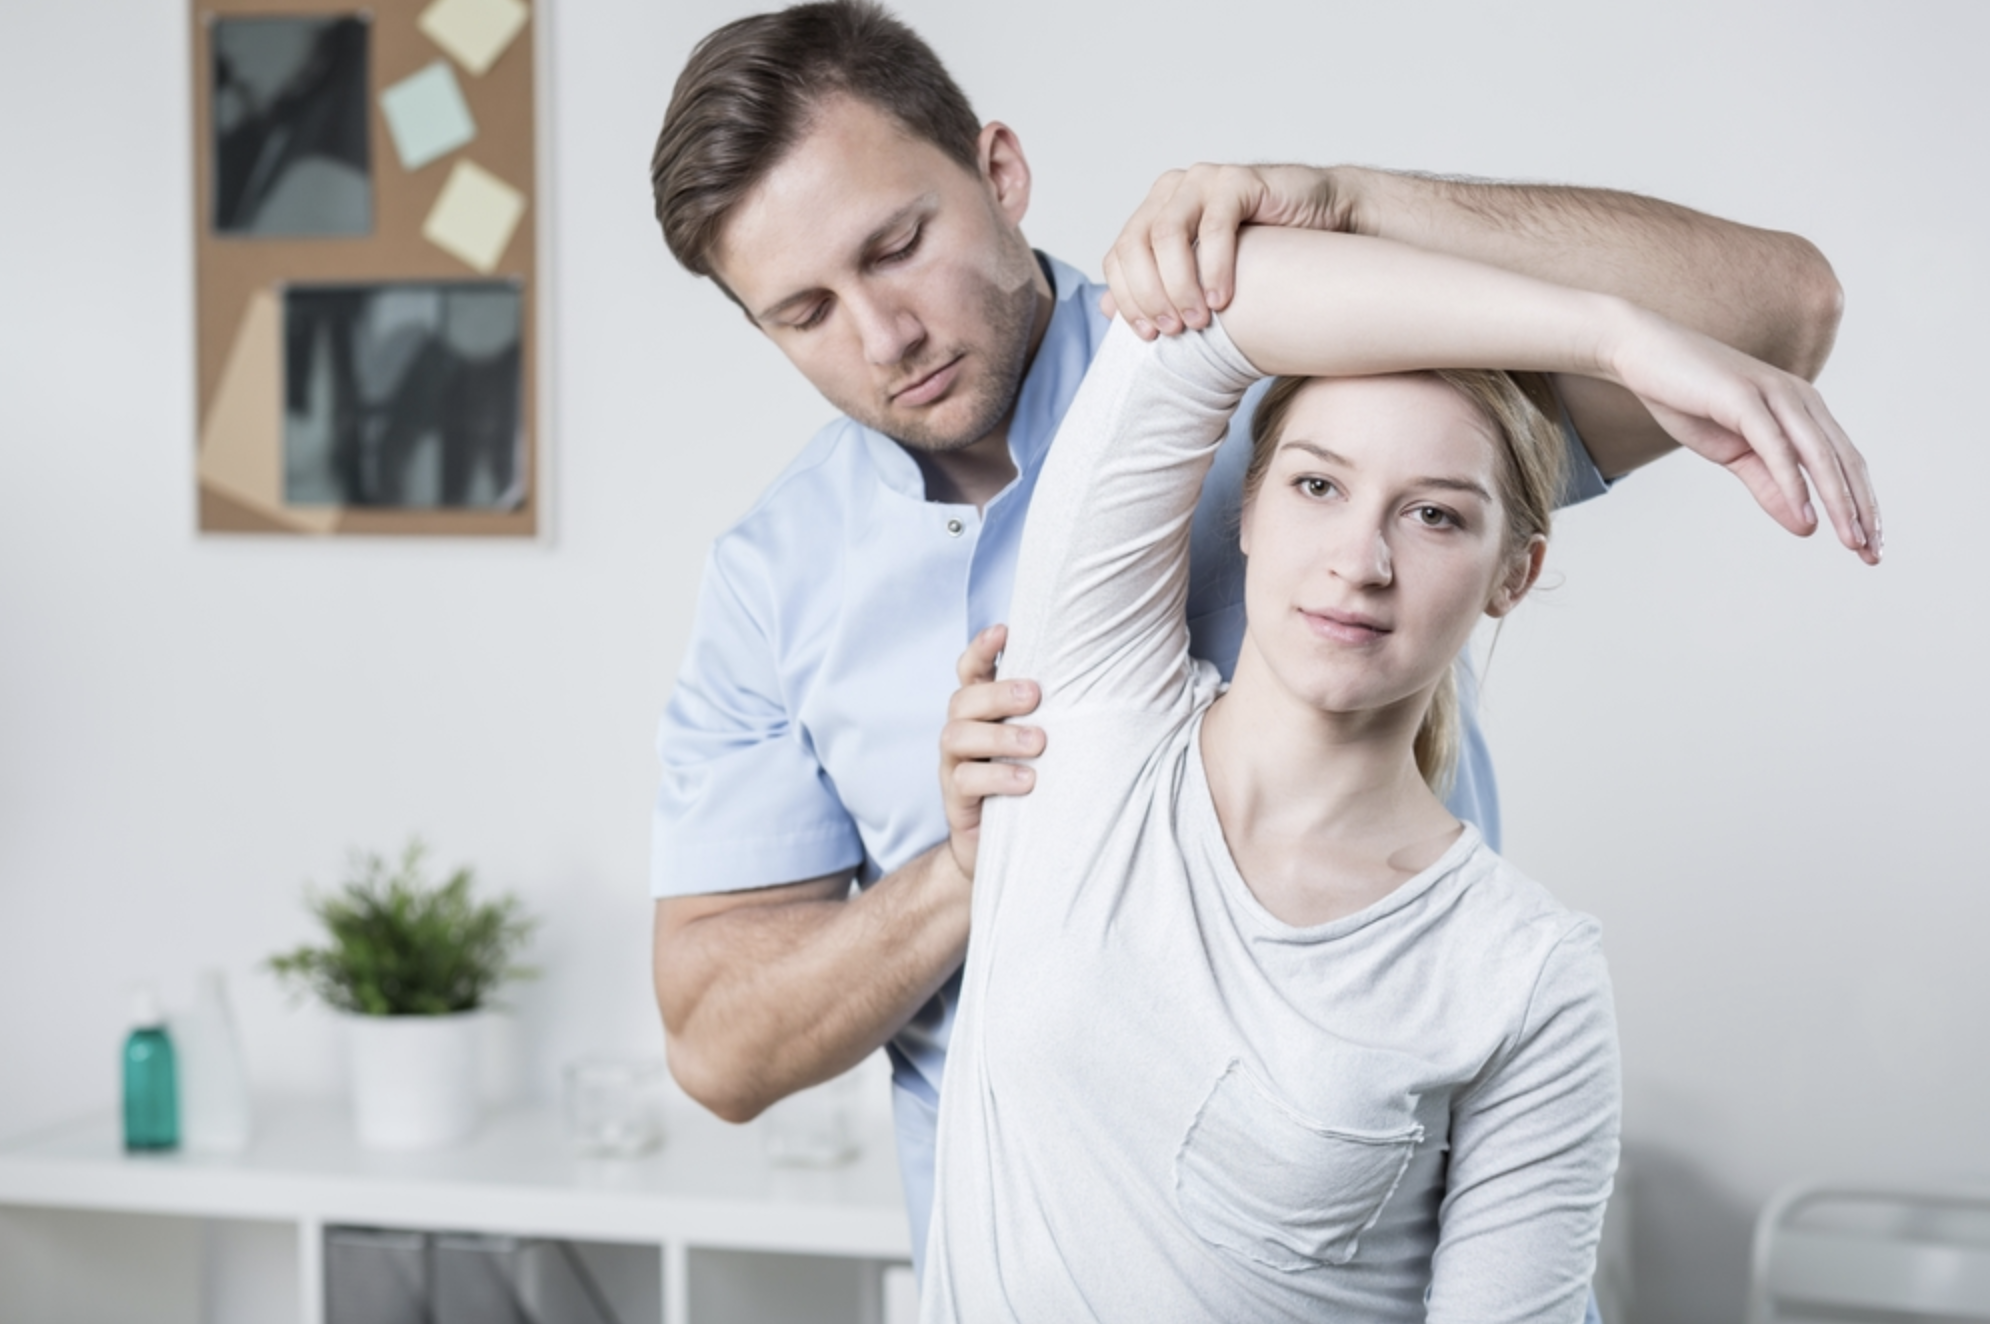 Is it safe to exercise after a chiropractic adjustment?